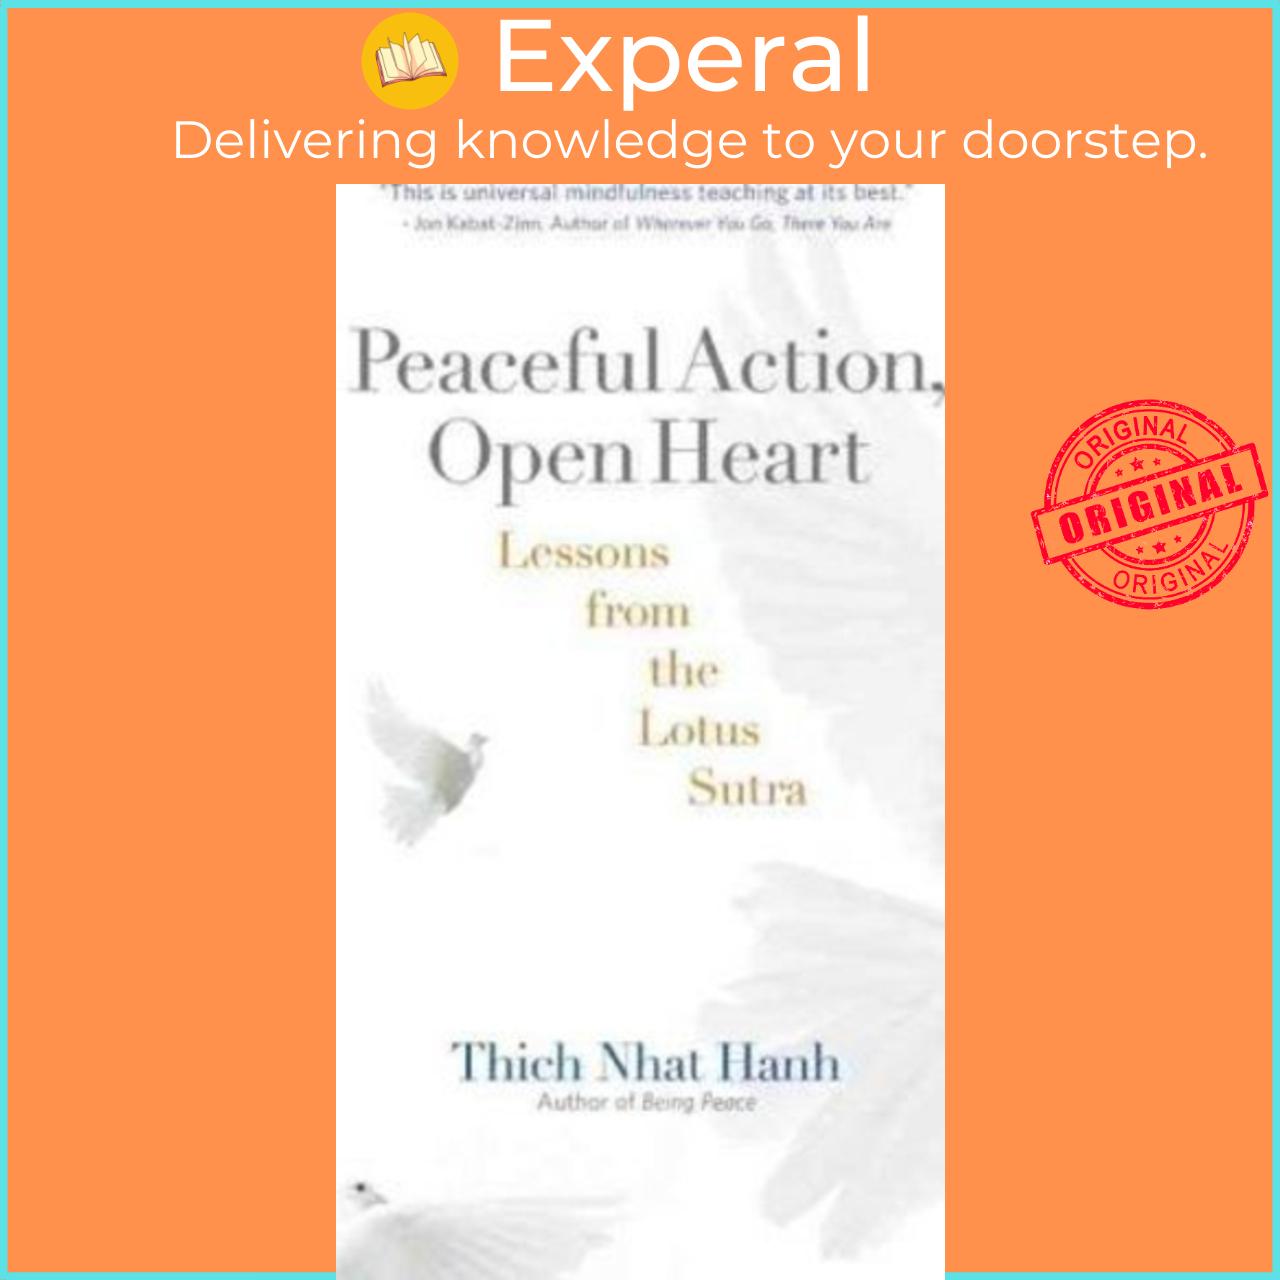 Sách - Peaceful Action, Open Heart by Thich Nhat Hanh (US edition, paperback)